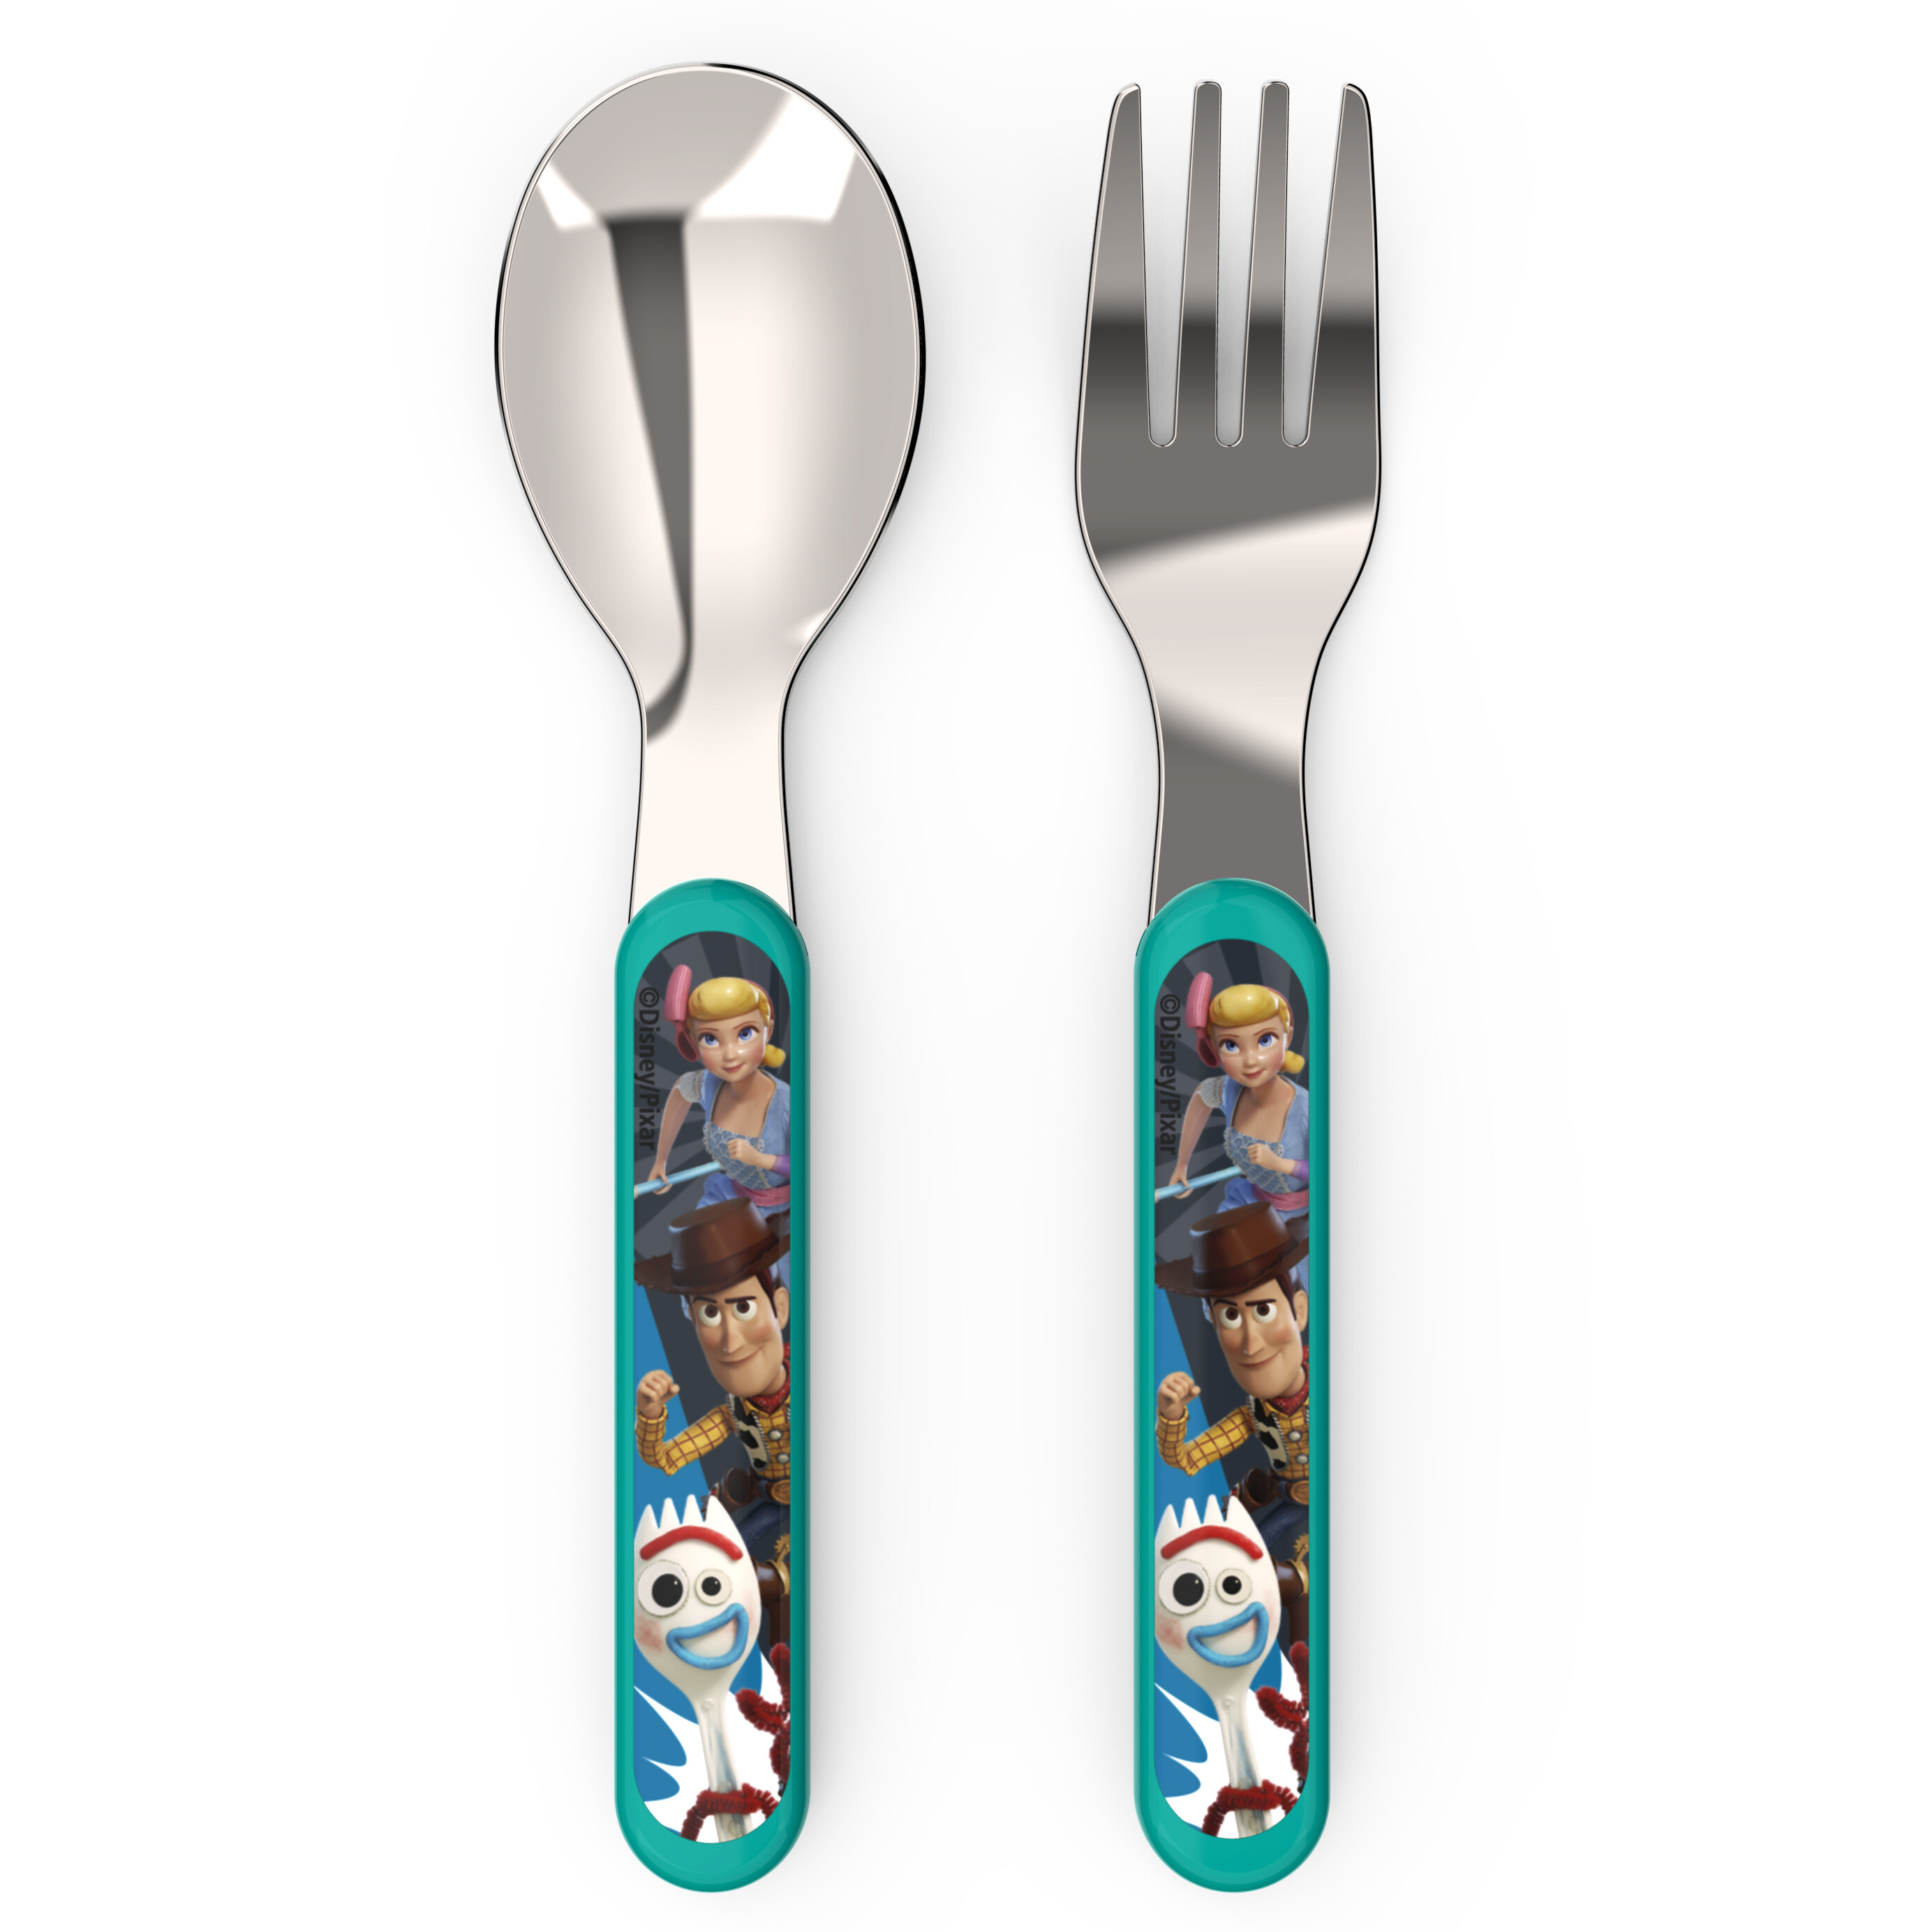 Tumbler and Utensil Tableware Made of Durable Material and Perfect for Kids Woody & Buzz Lightyear, 5 Piece Set, BPA Free Bowl Zak Designs Toy Story 4 Movie Kids Dinnerware Set Includes Plate 